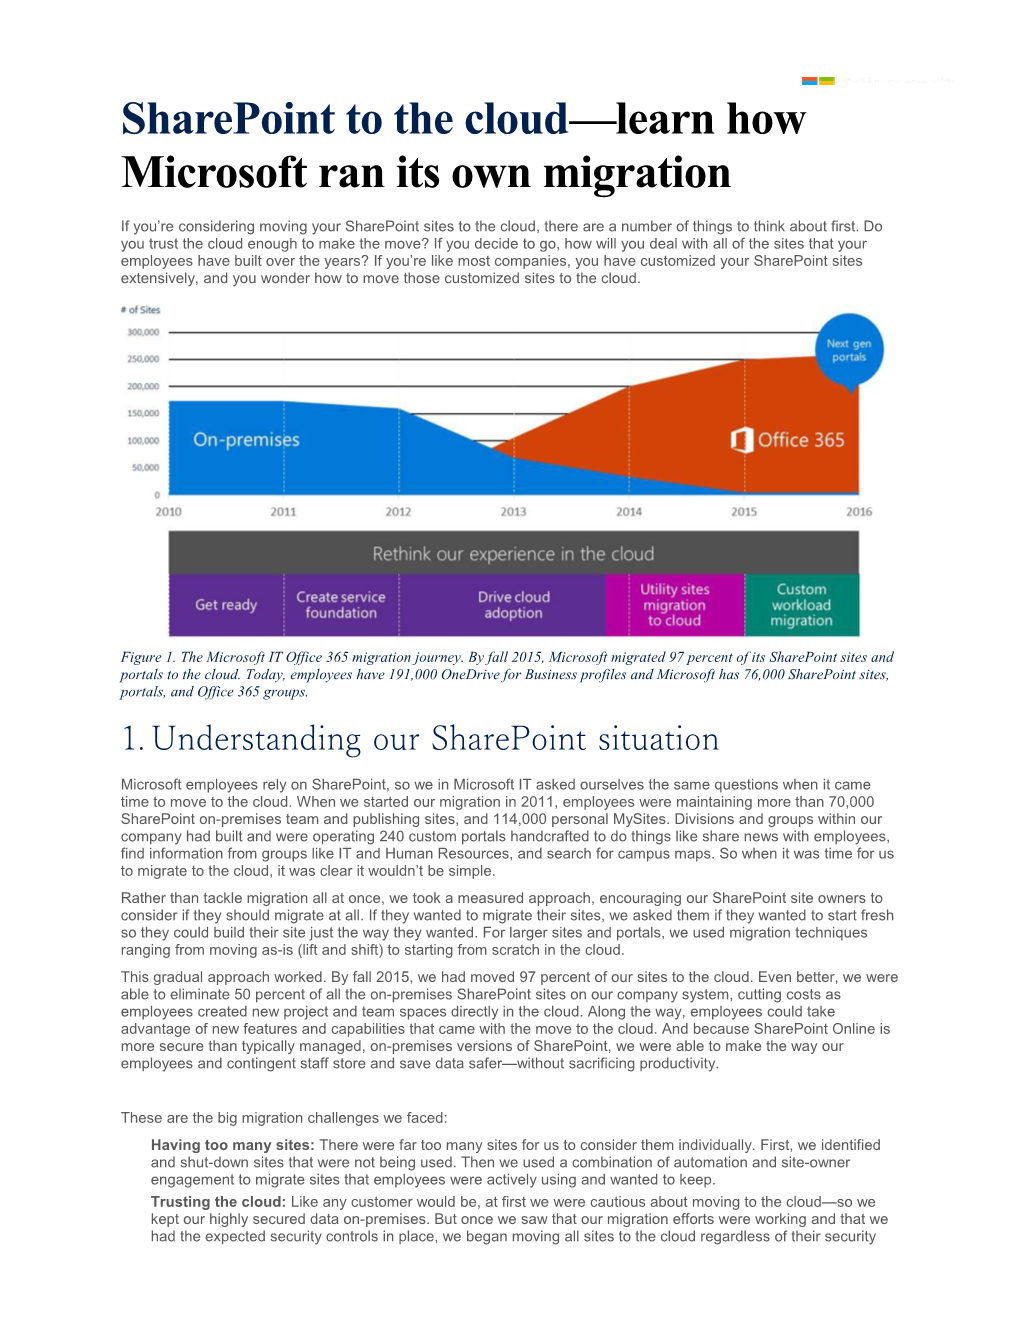 Sharepoint to the Cloud: Learn How Microsoft Ran Its Own Migration